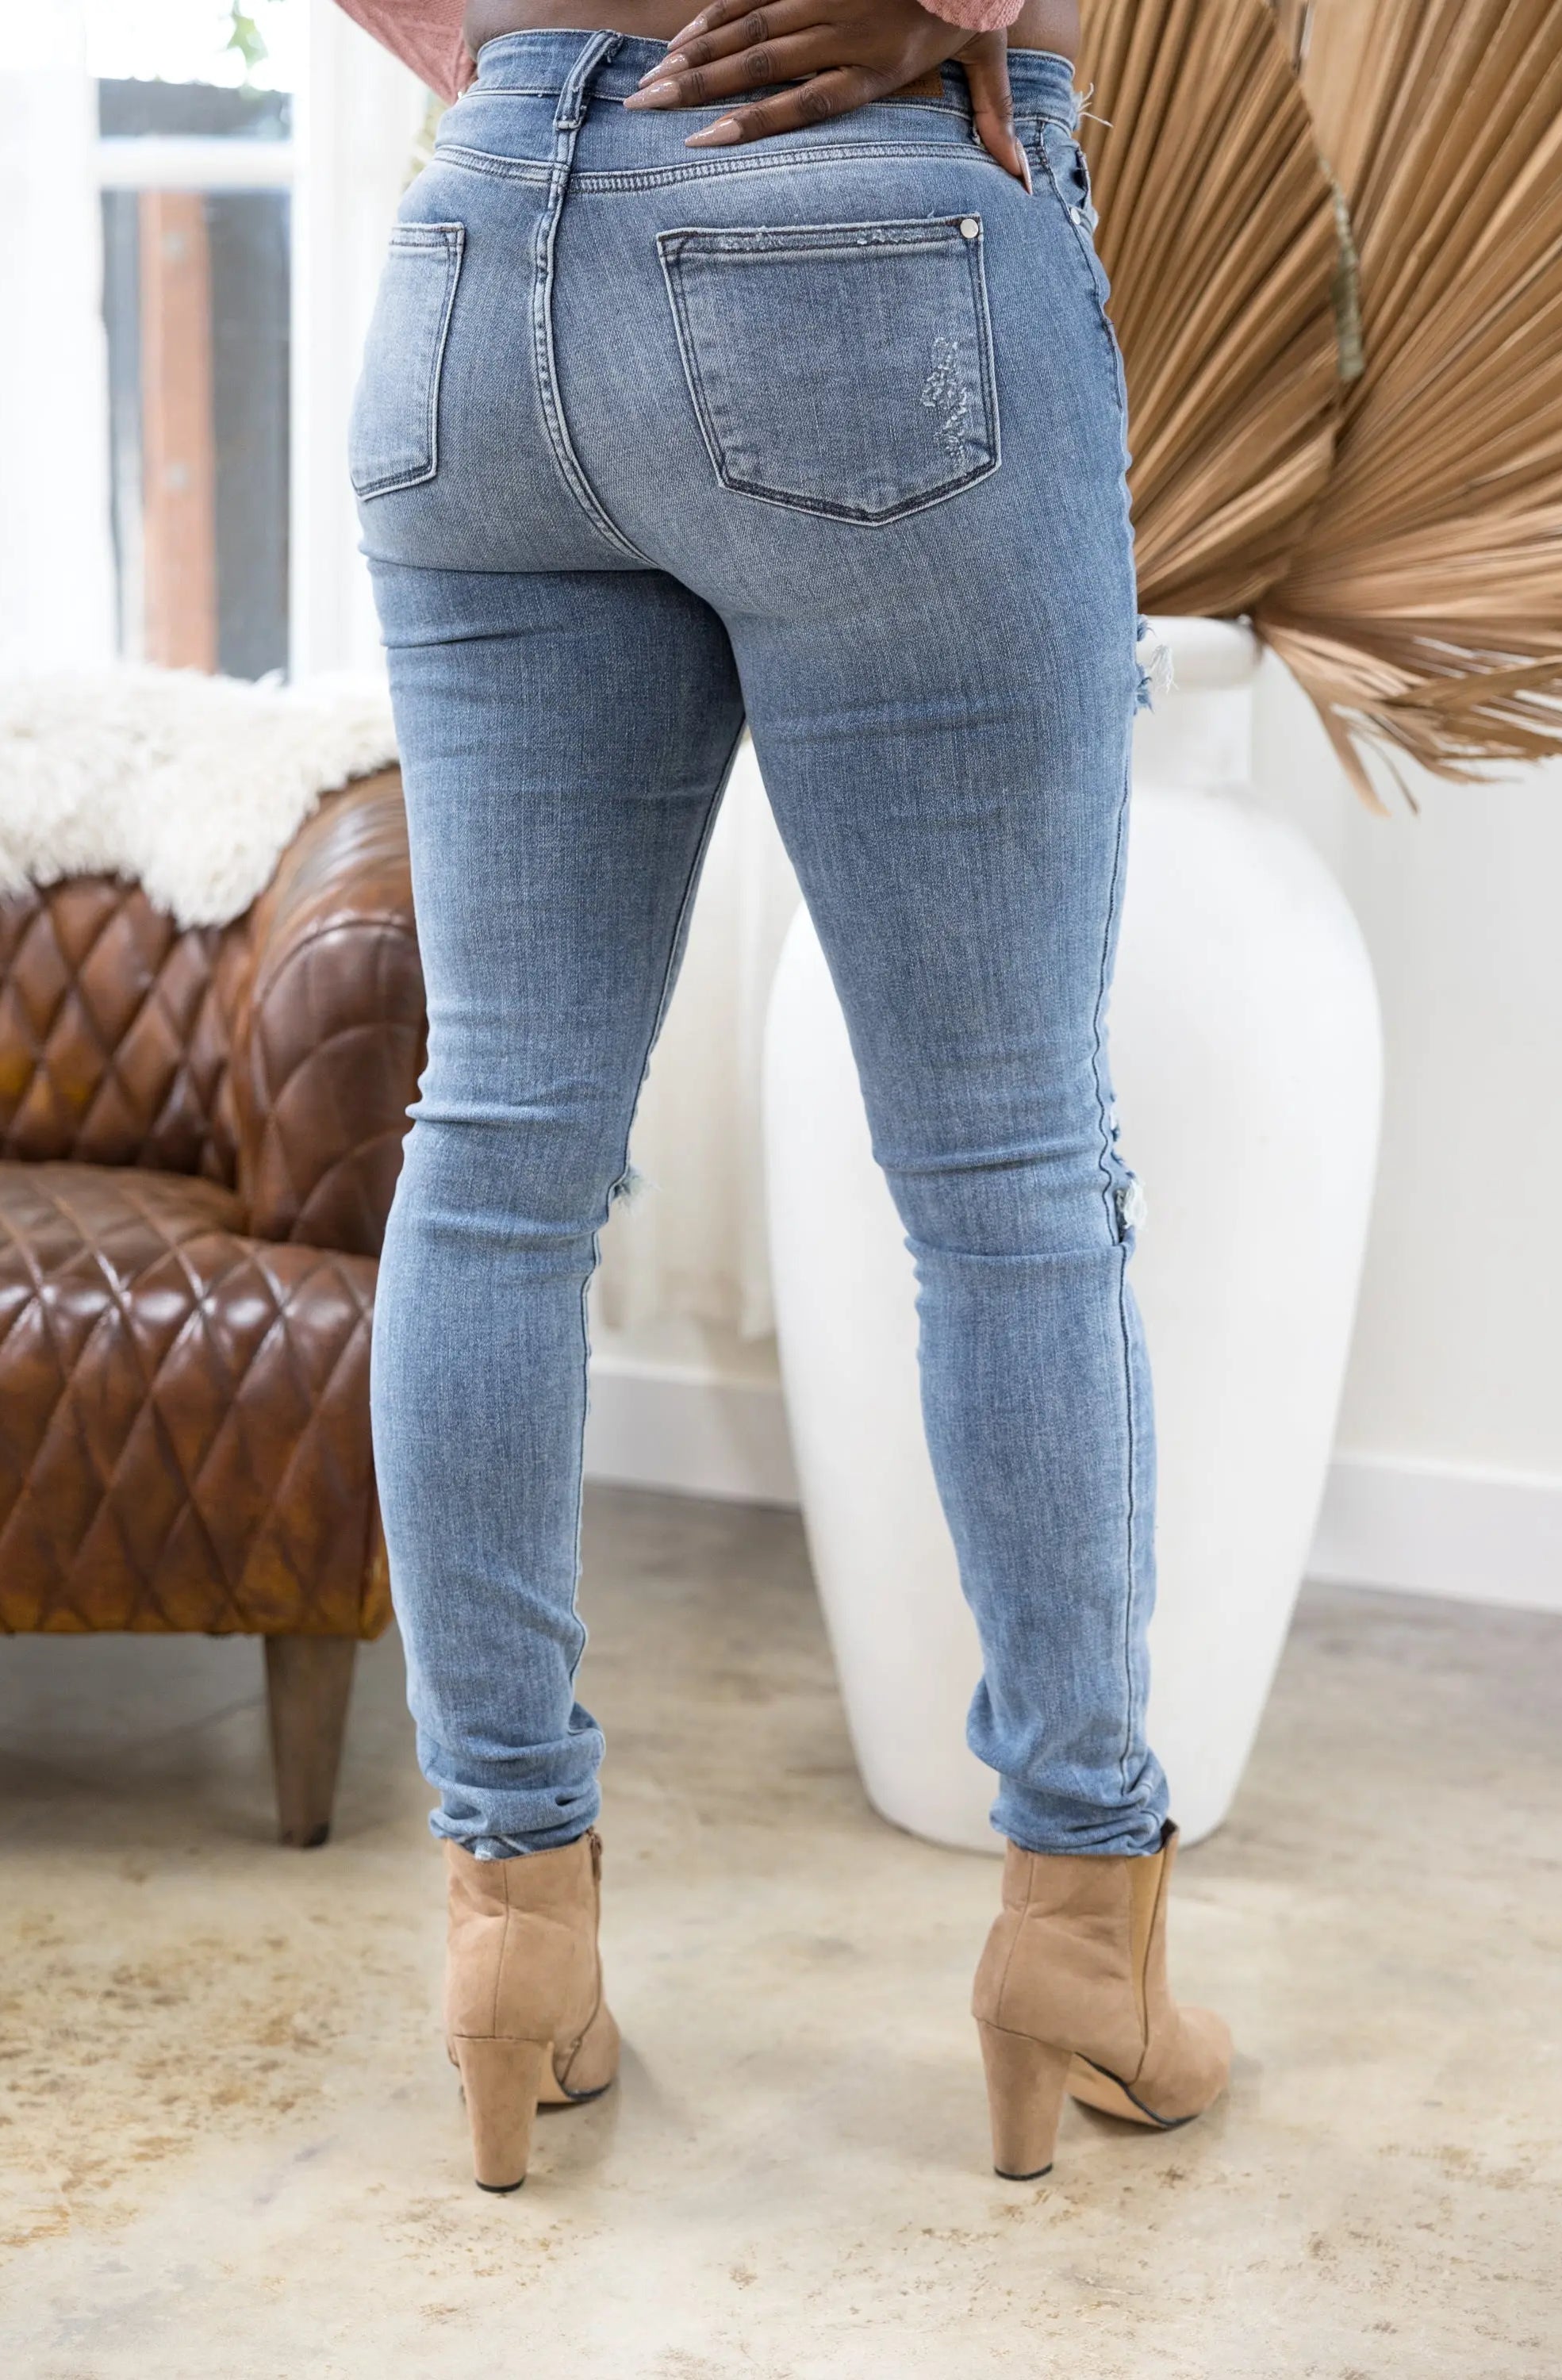 Reach For The Stars - Judy Blue TALL Skinnies JB Boutique Simplified